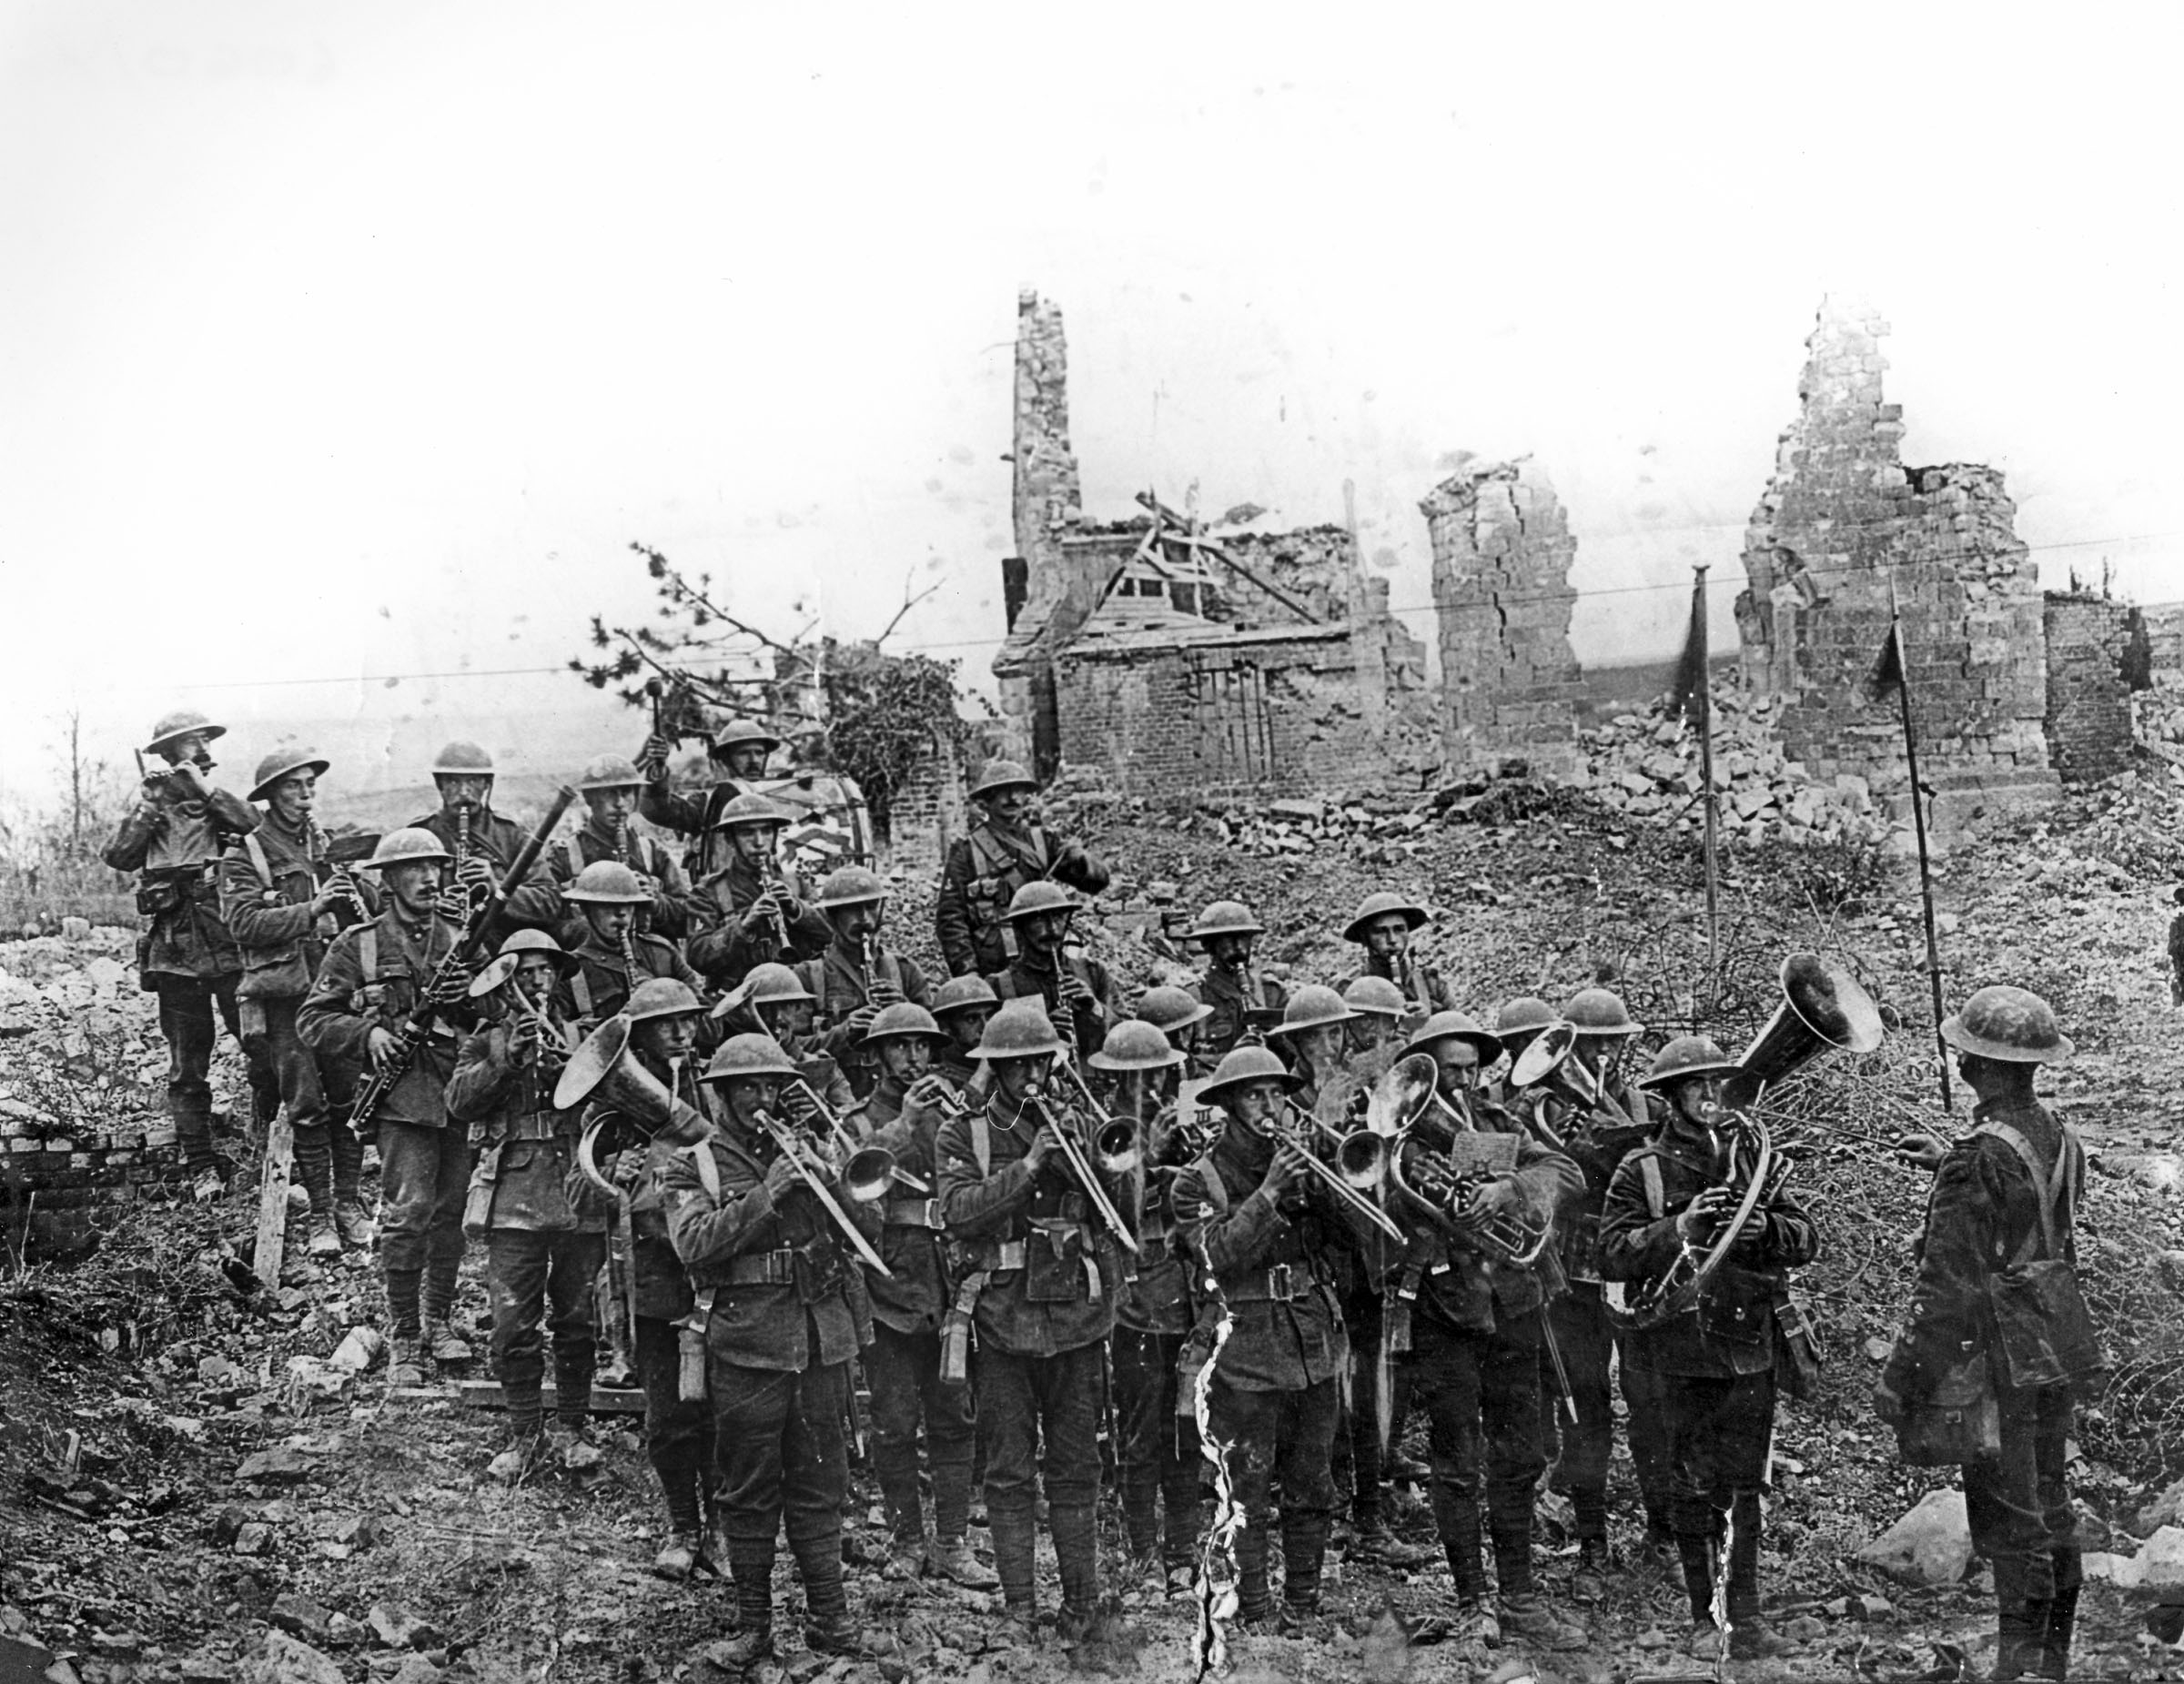 Photograph of the Band of the 5th Battalion, South Staffordshire Regiment, playing in the ruins at Ypres, Belgium, during the Great War